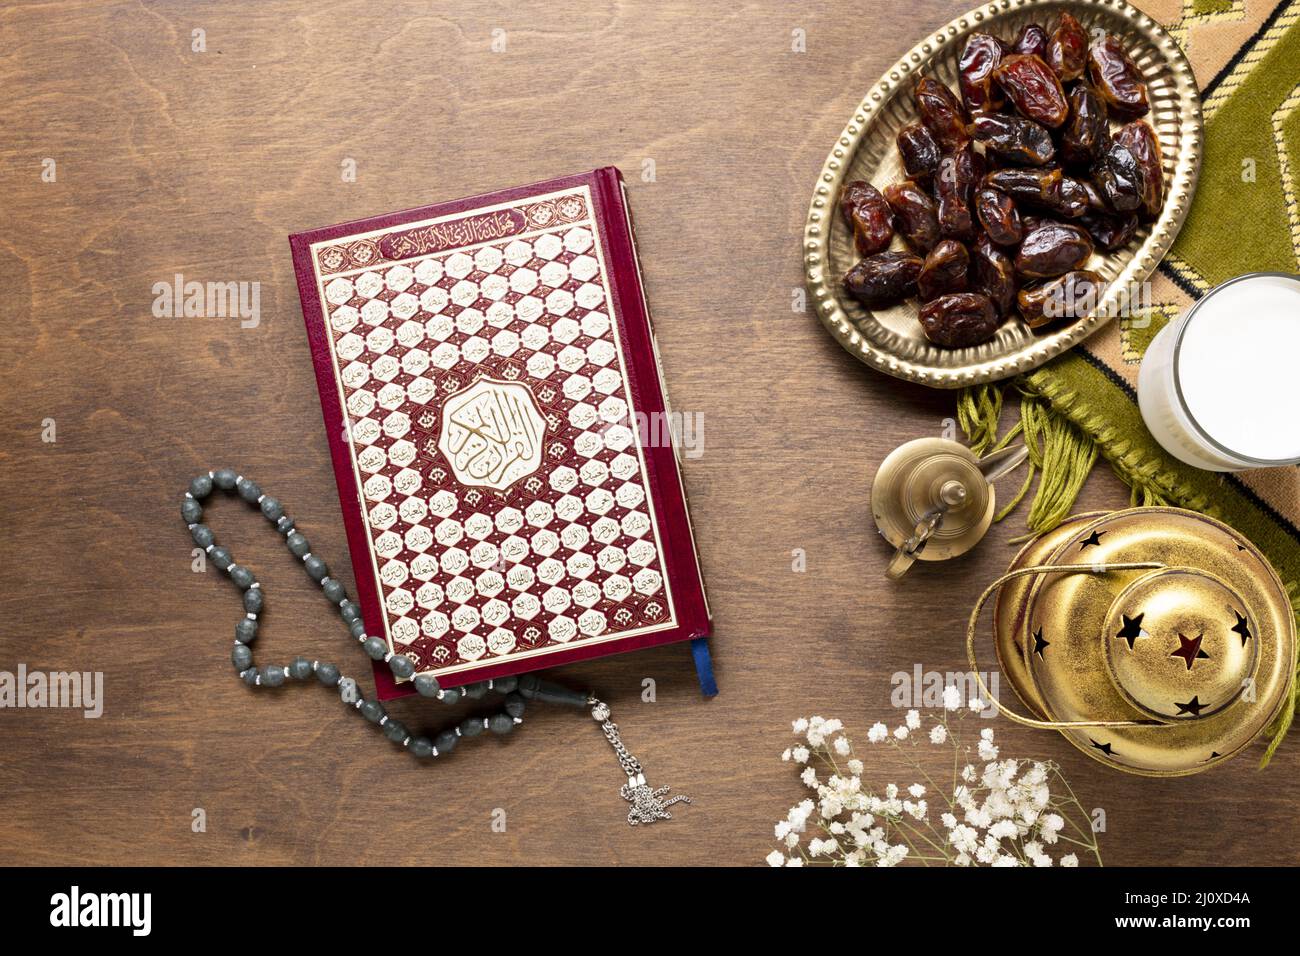 Quran prayer beads wooden table. High quality beautiful photo concept Stock Photo